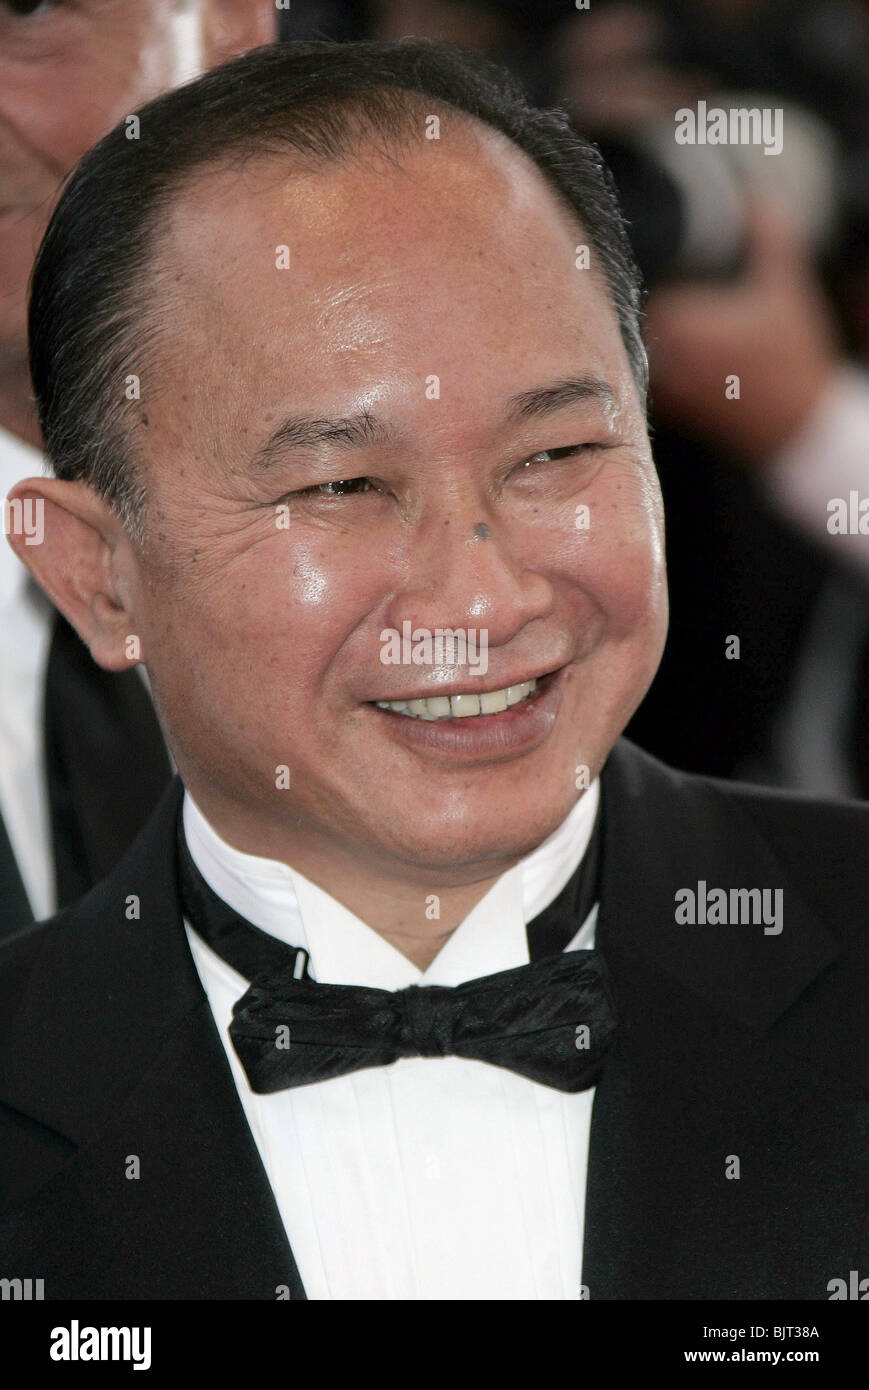 JOHN WOO CANNES FILM FESTIVAL 2005 CANNES FRANCE 12 May 2005 Stock Photo